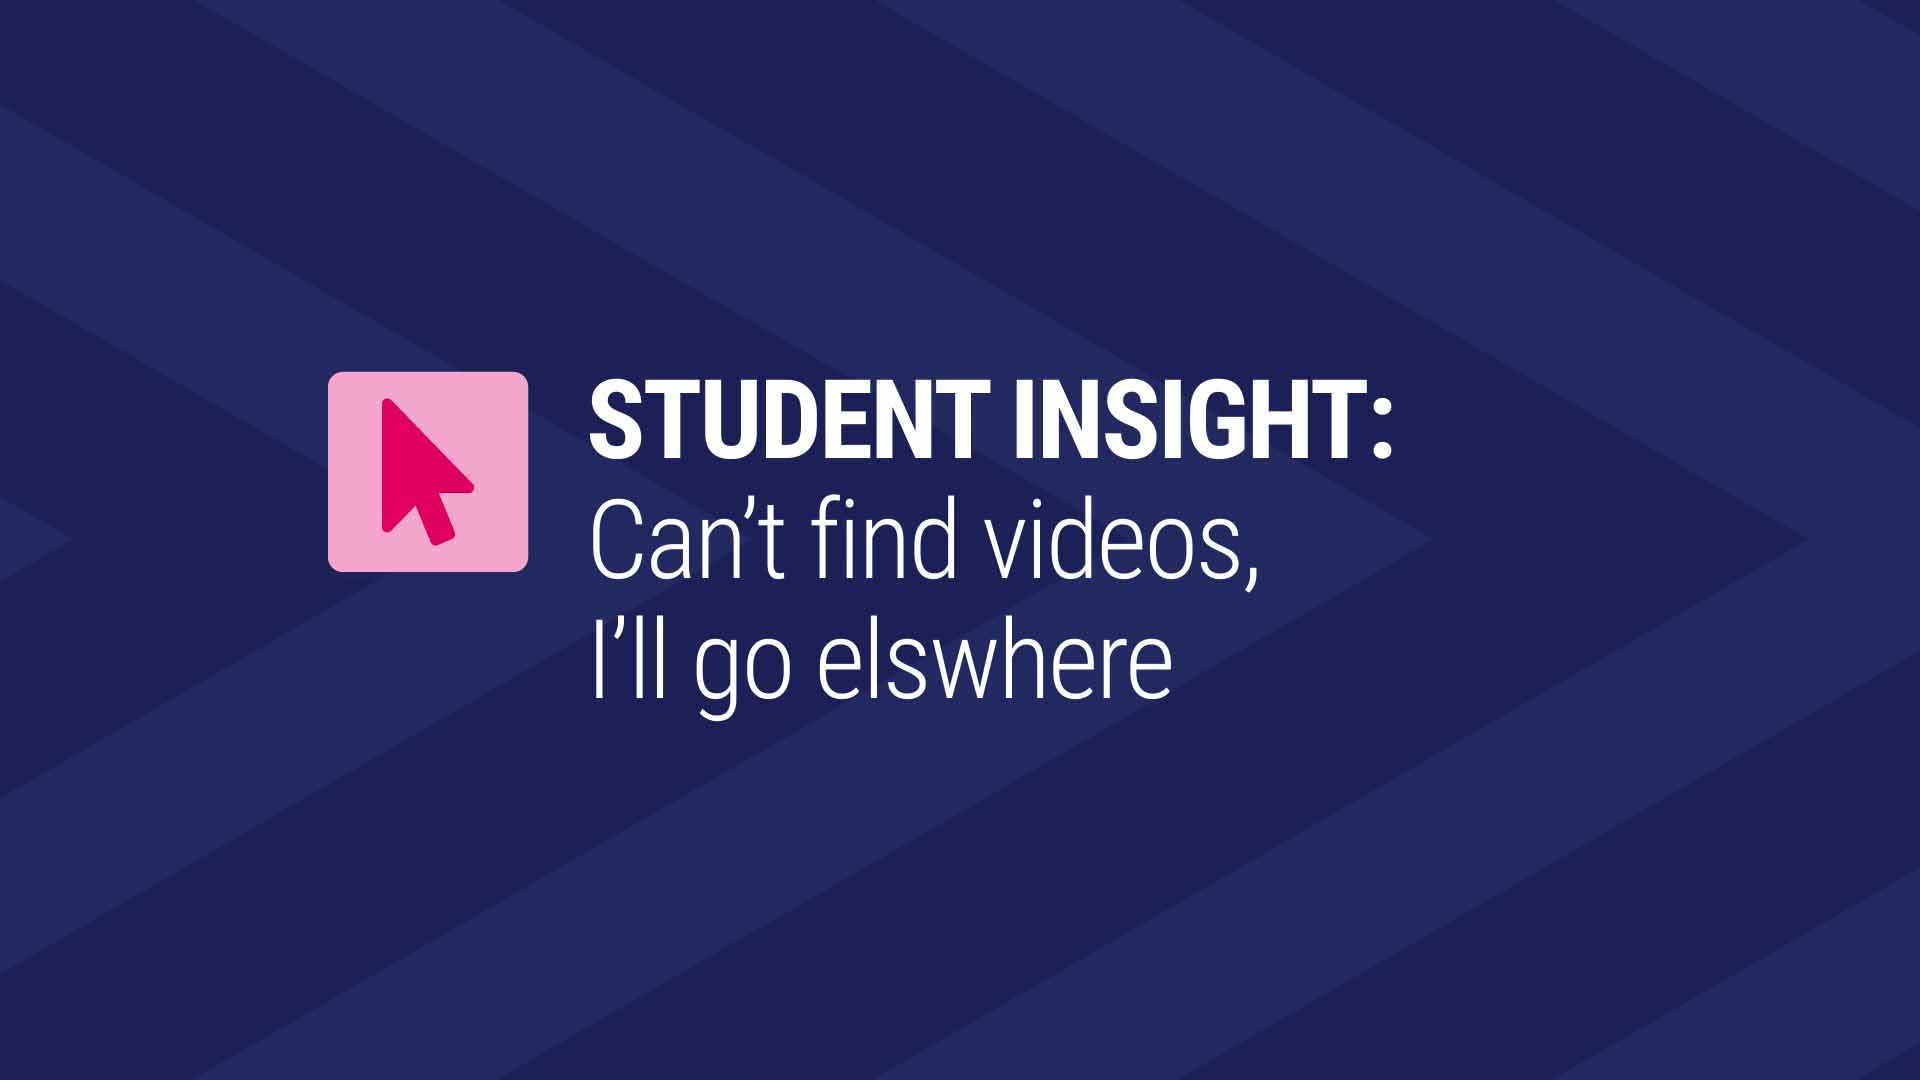 Card image for "19 - Student Insights: Can't Find Videos"